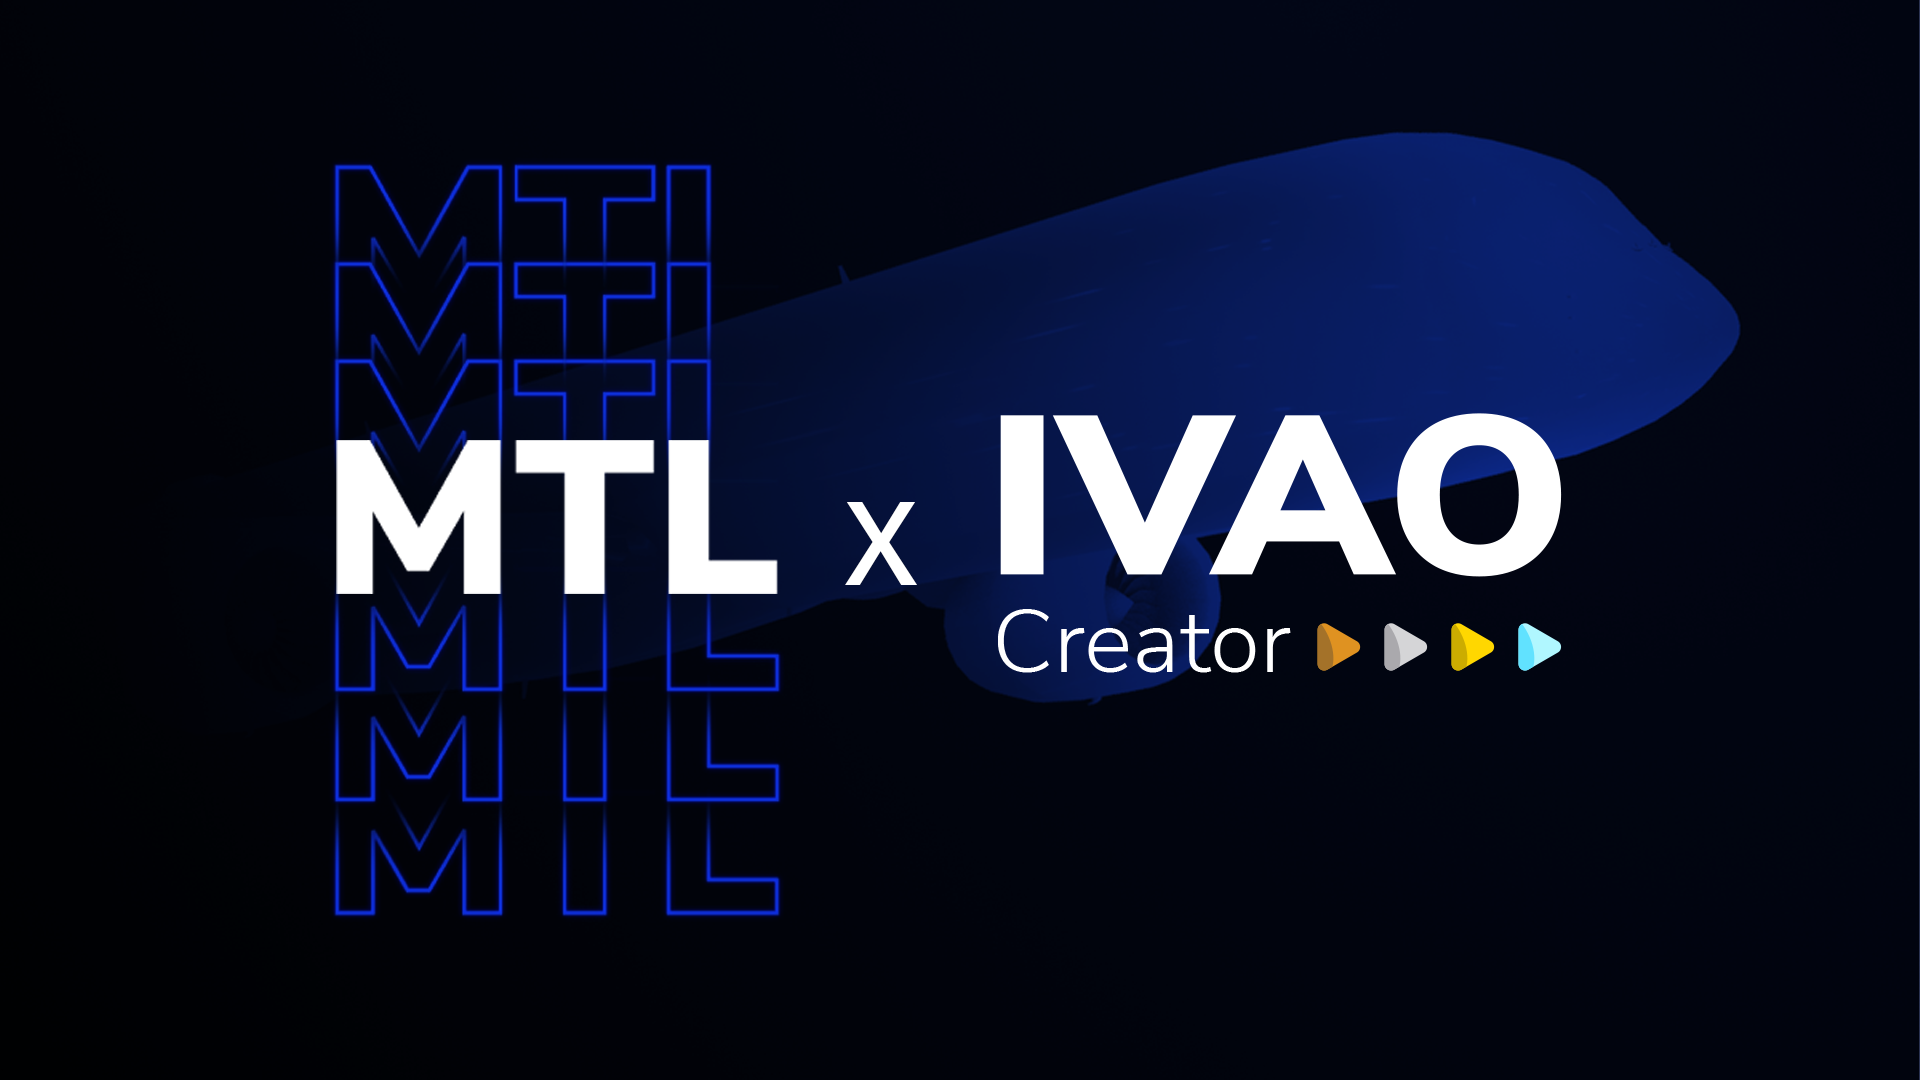 IVAO Creator Partnership Programme, what's to come?